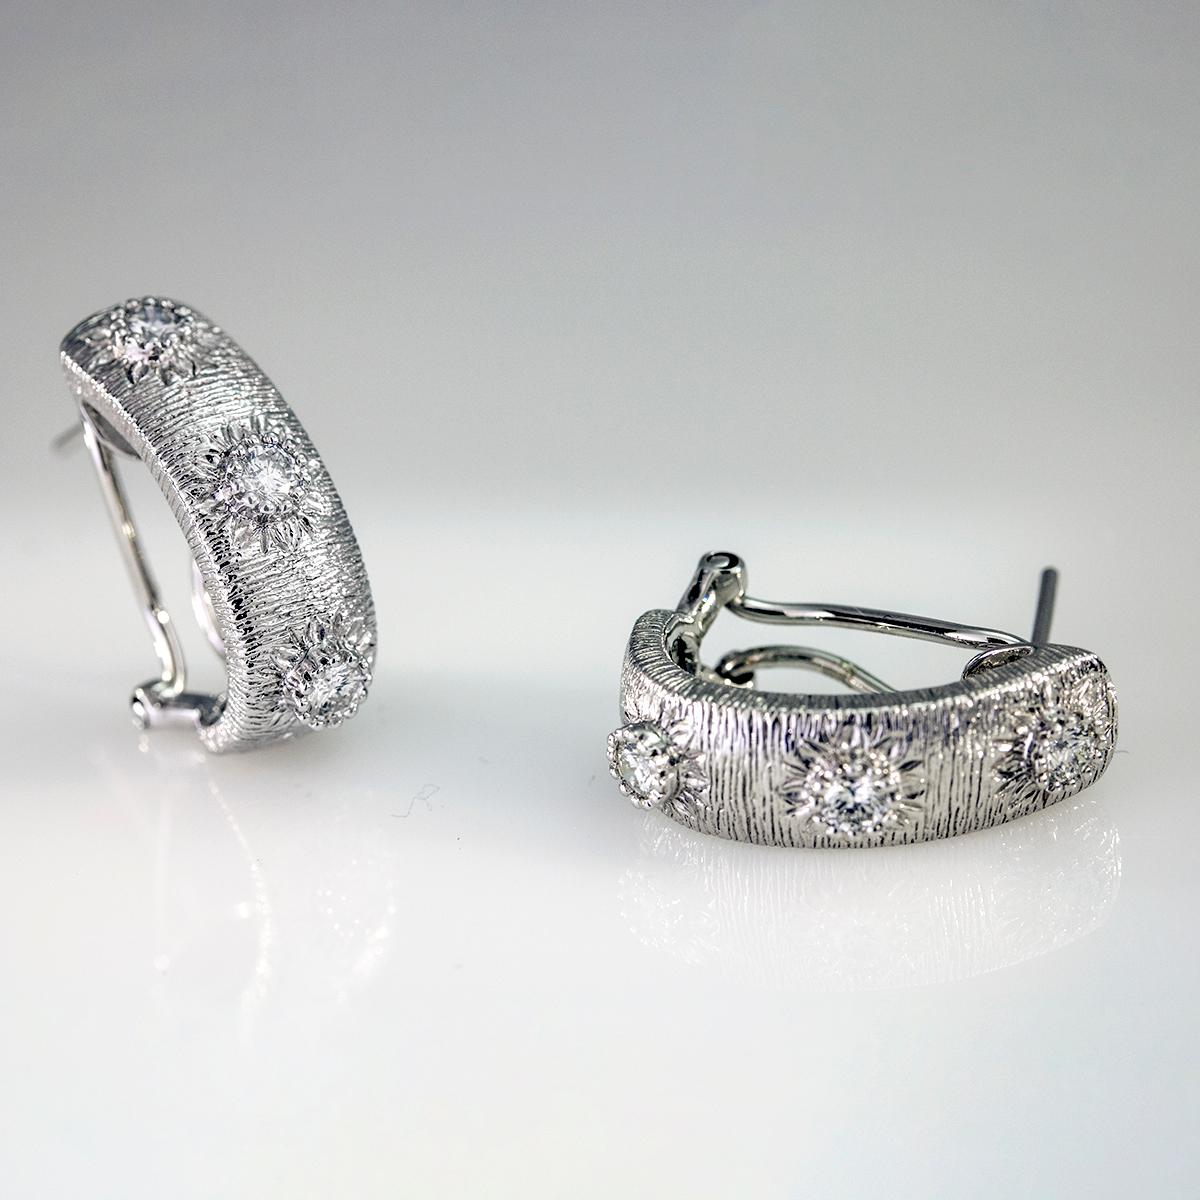 Artfully created by Orostar. These elegant women's earrings are available in stock.
* Metal: 14 karat white gold
* Gold Weight: 8.3 grams
* Stones: Natural Diamonds
* Diamonds Weight: .60 carats
* Diamond Color Grade:  G-H
* Diamond Clarity Grade: